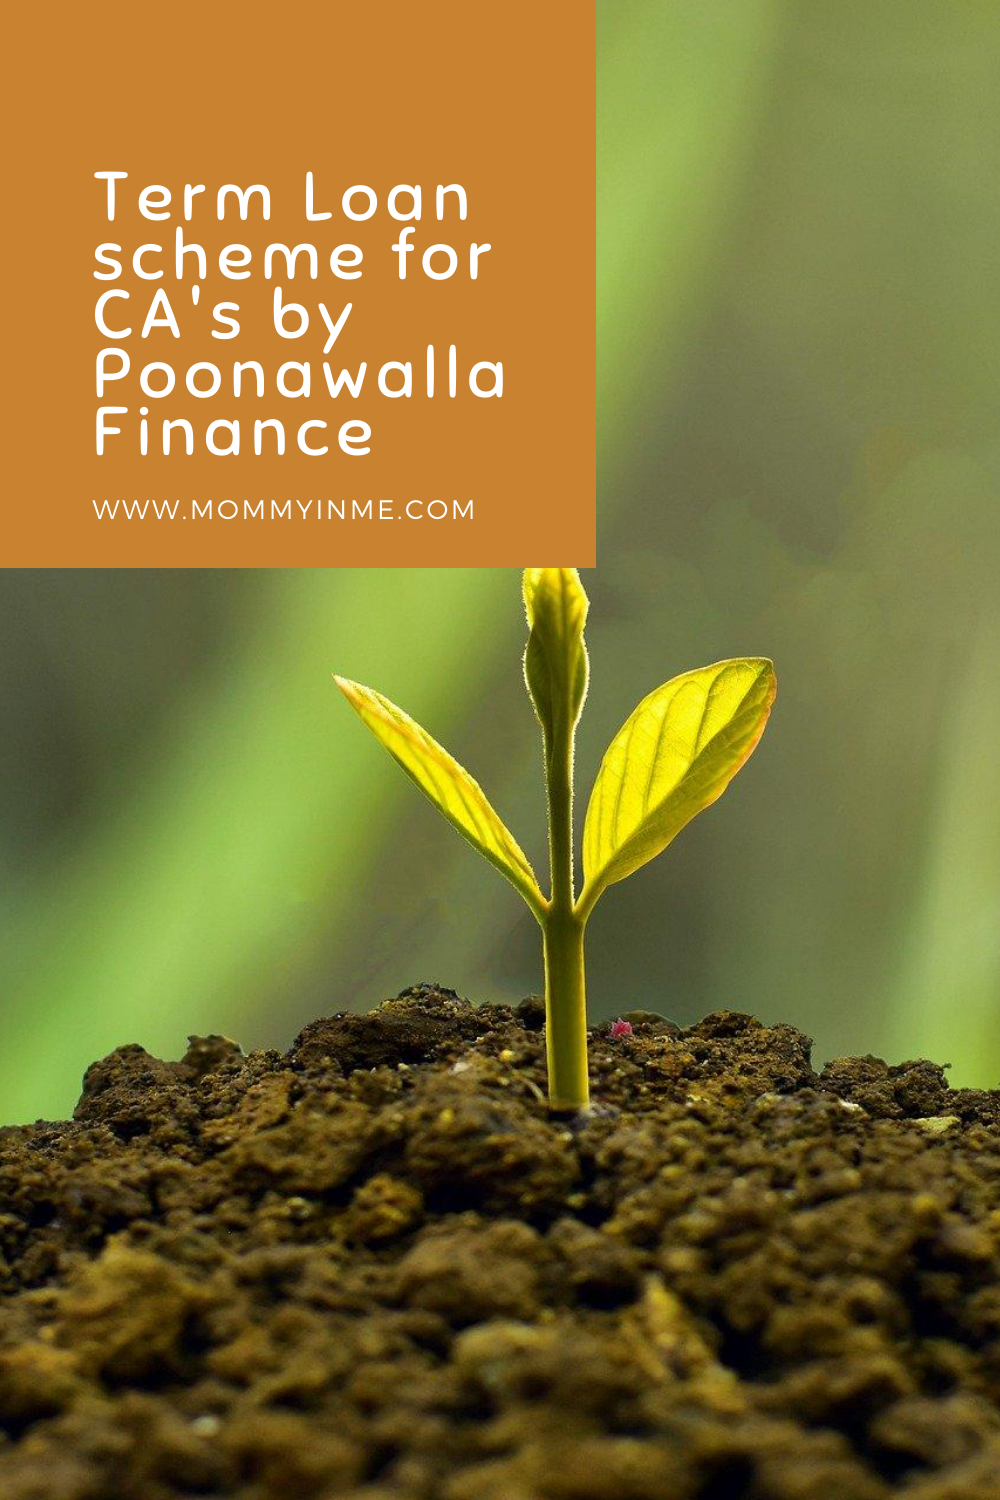 A Special Term Loan scheme for Chartered Accountants (CAs) by Poonawalla Finance  #PoonawallaFinance  #termloan #covid #economy #CharteredAccountants